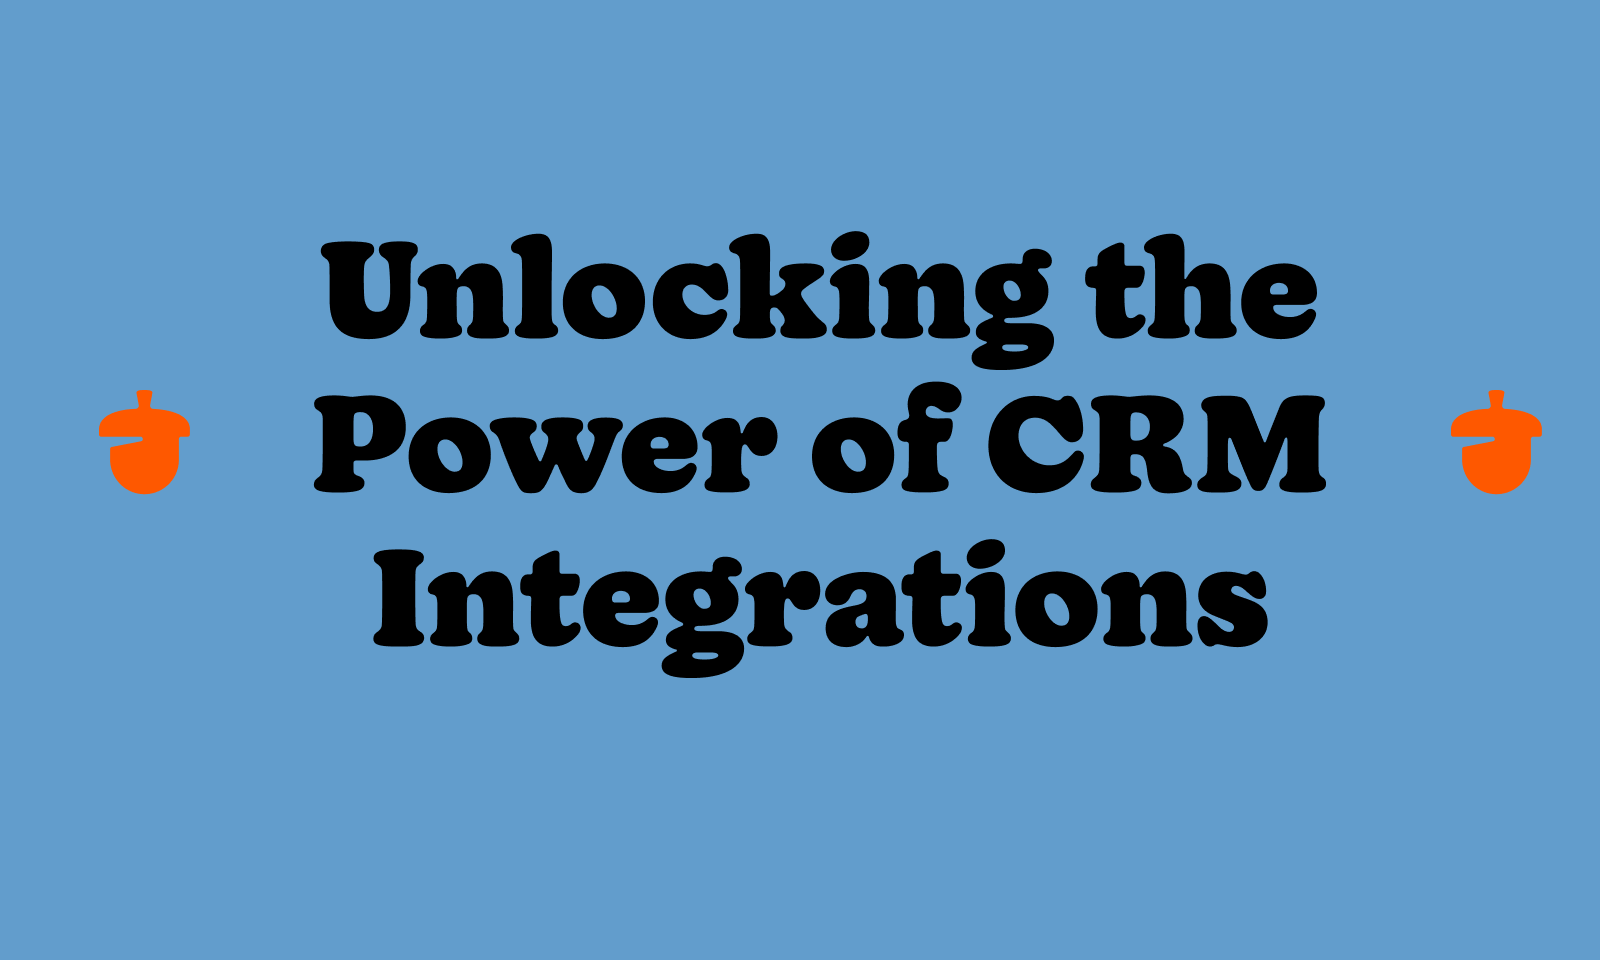 Unlocking the Power of CRM Integrations